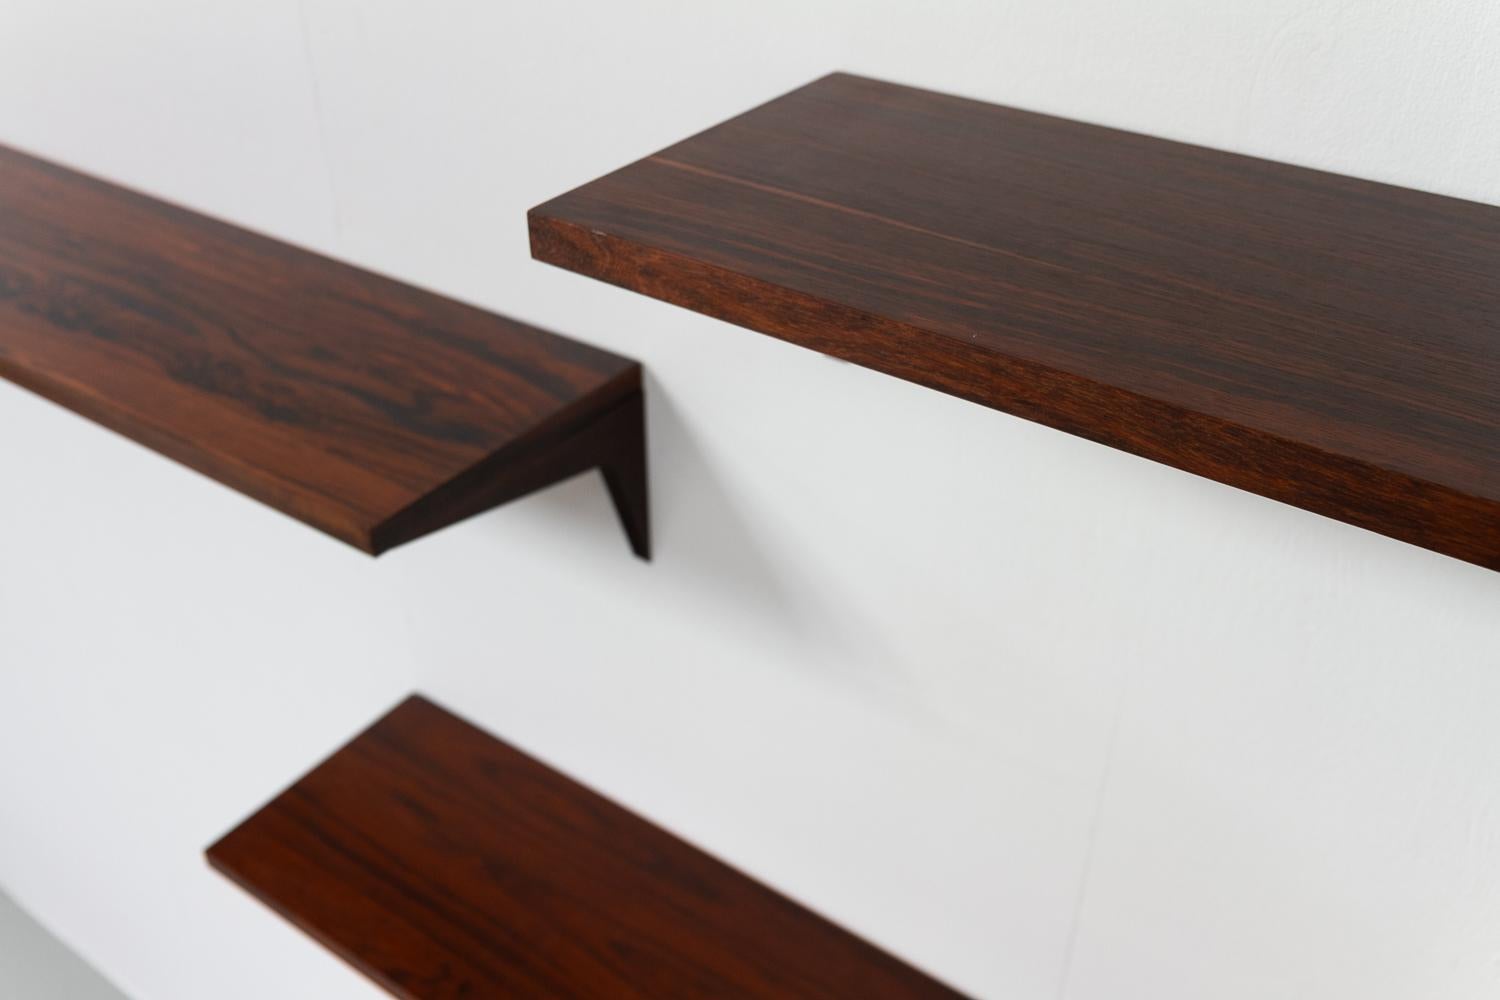 Mid-20th Century Danish Modern Rosewood Shelves by Poul Cadovius for Cado, 1960s. Set of 3.